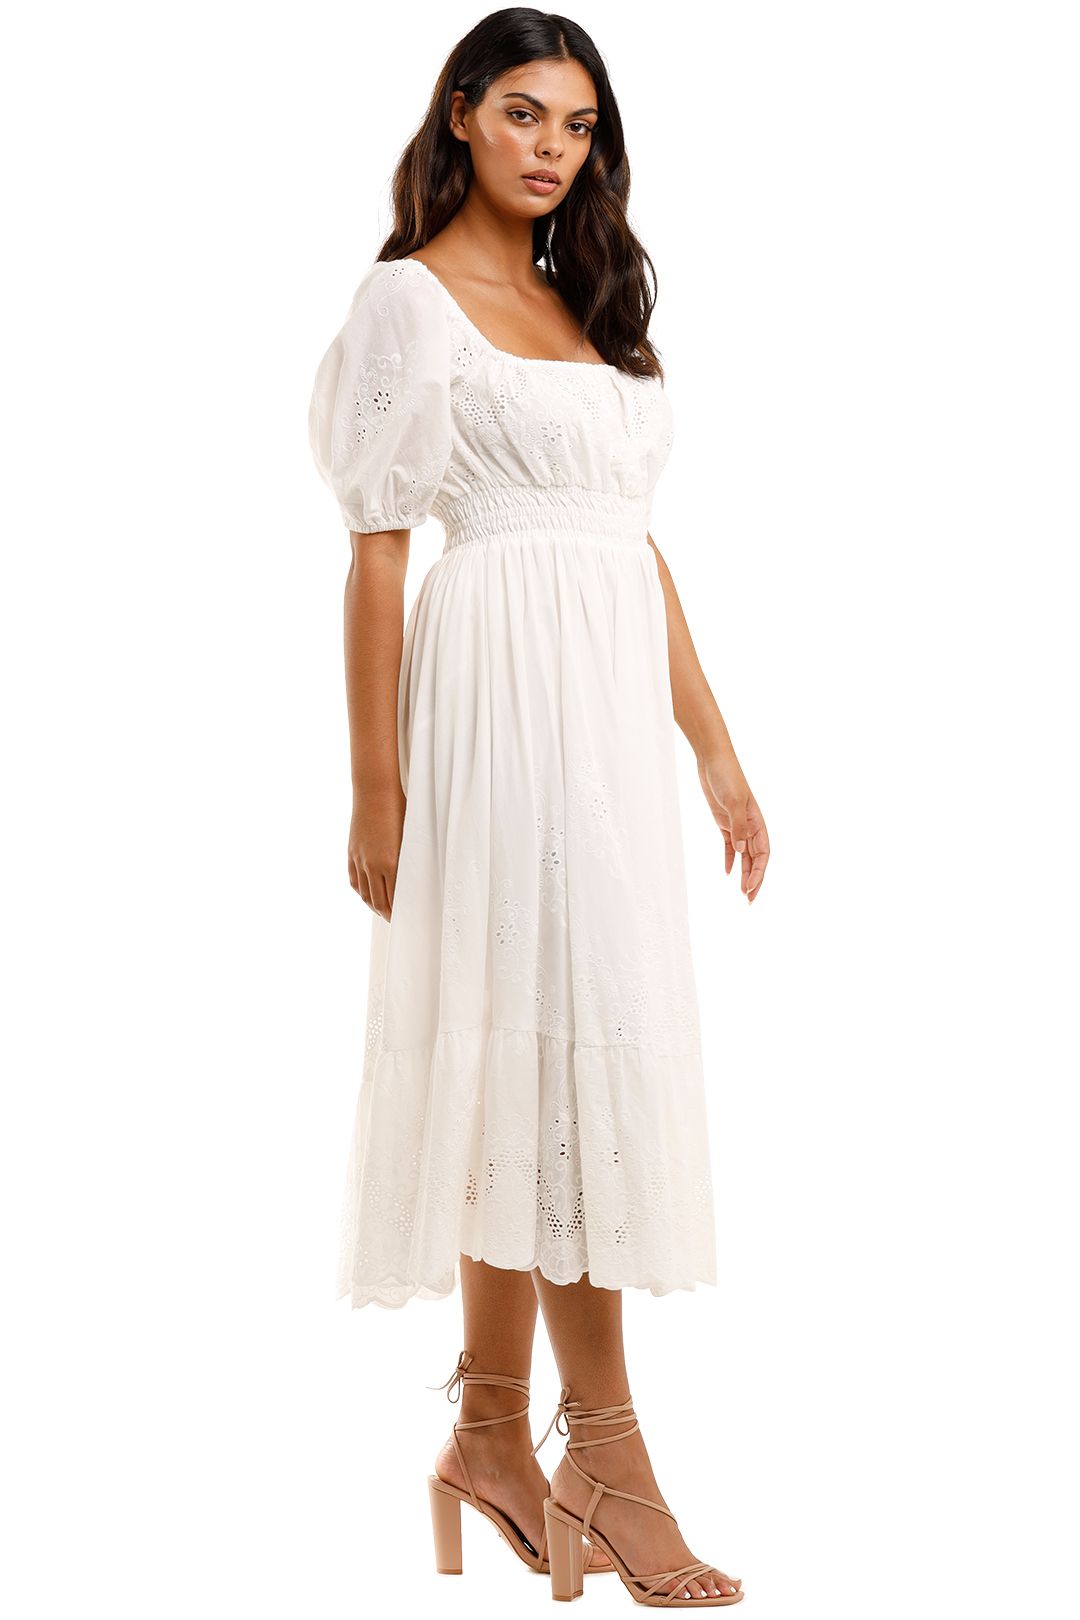 Spell Capulet Broderie Anglaise Soiree Dress White Cotton Material